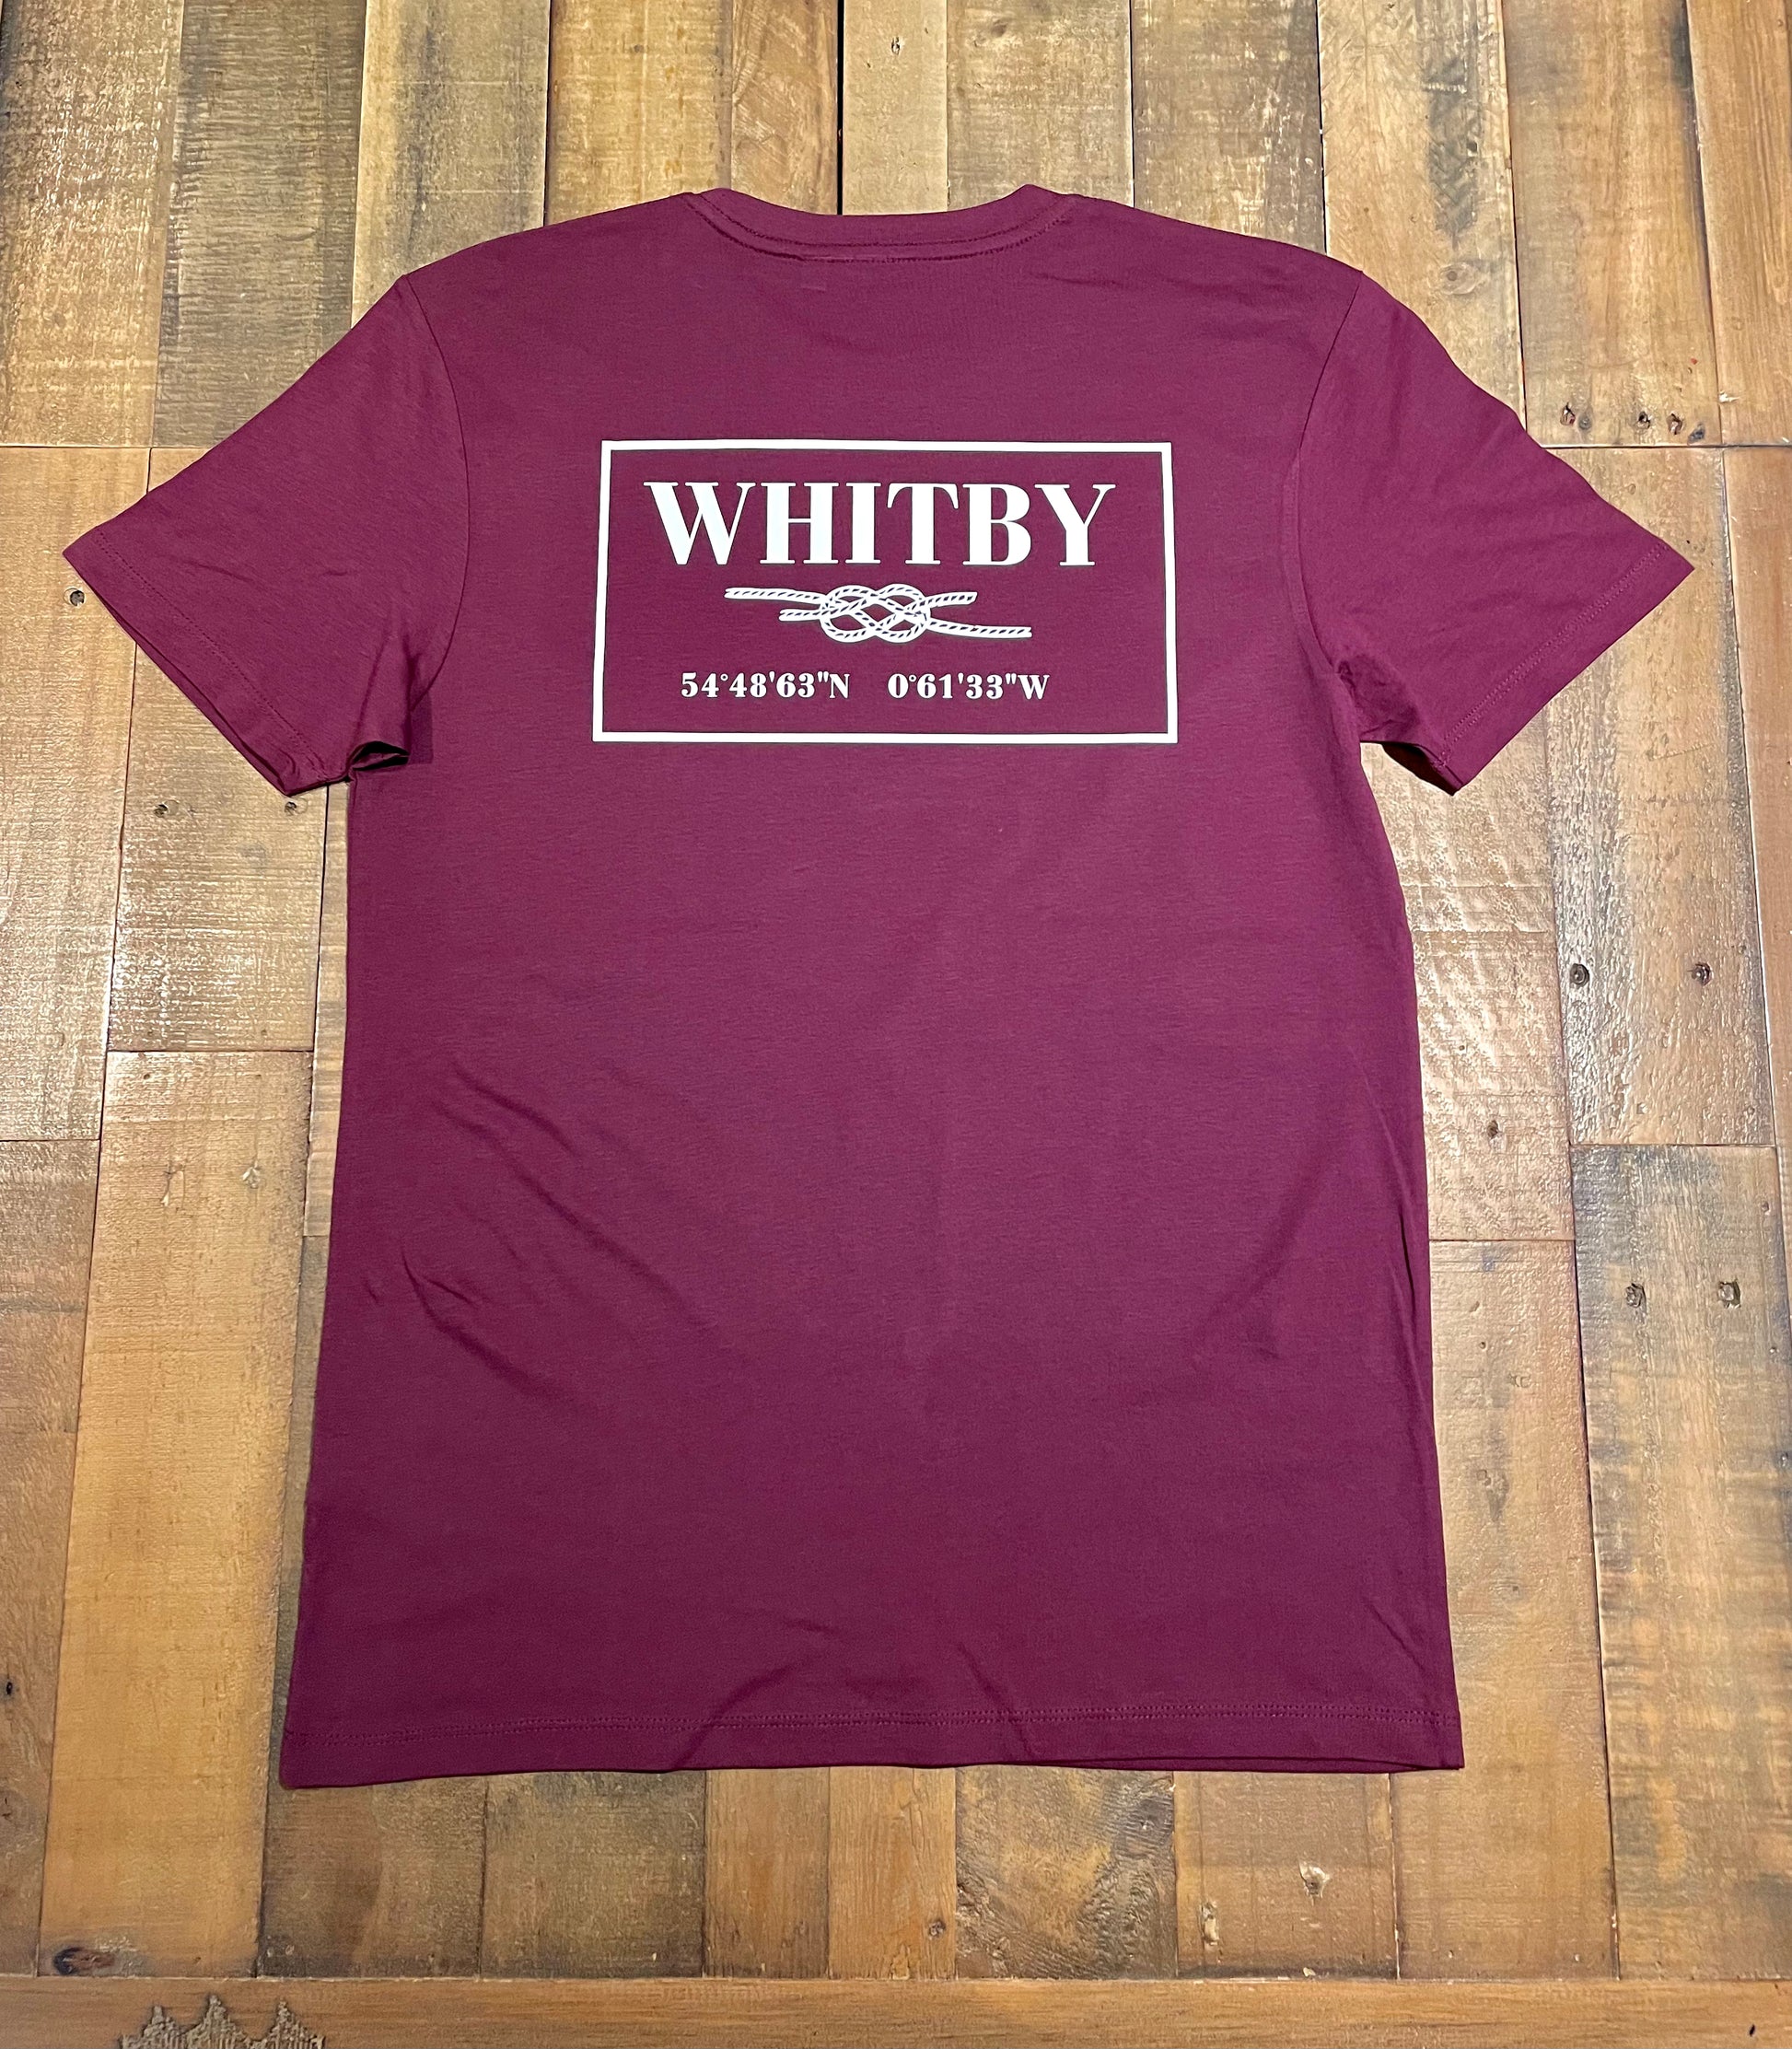 The unisex Whitby T-shirts in burgundy from The Bay Company. 